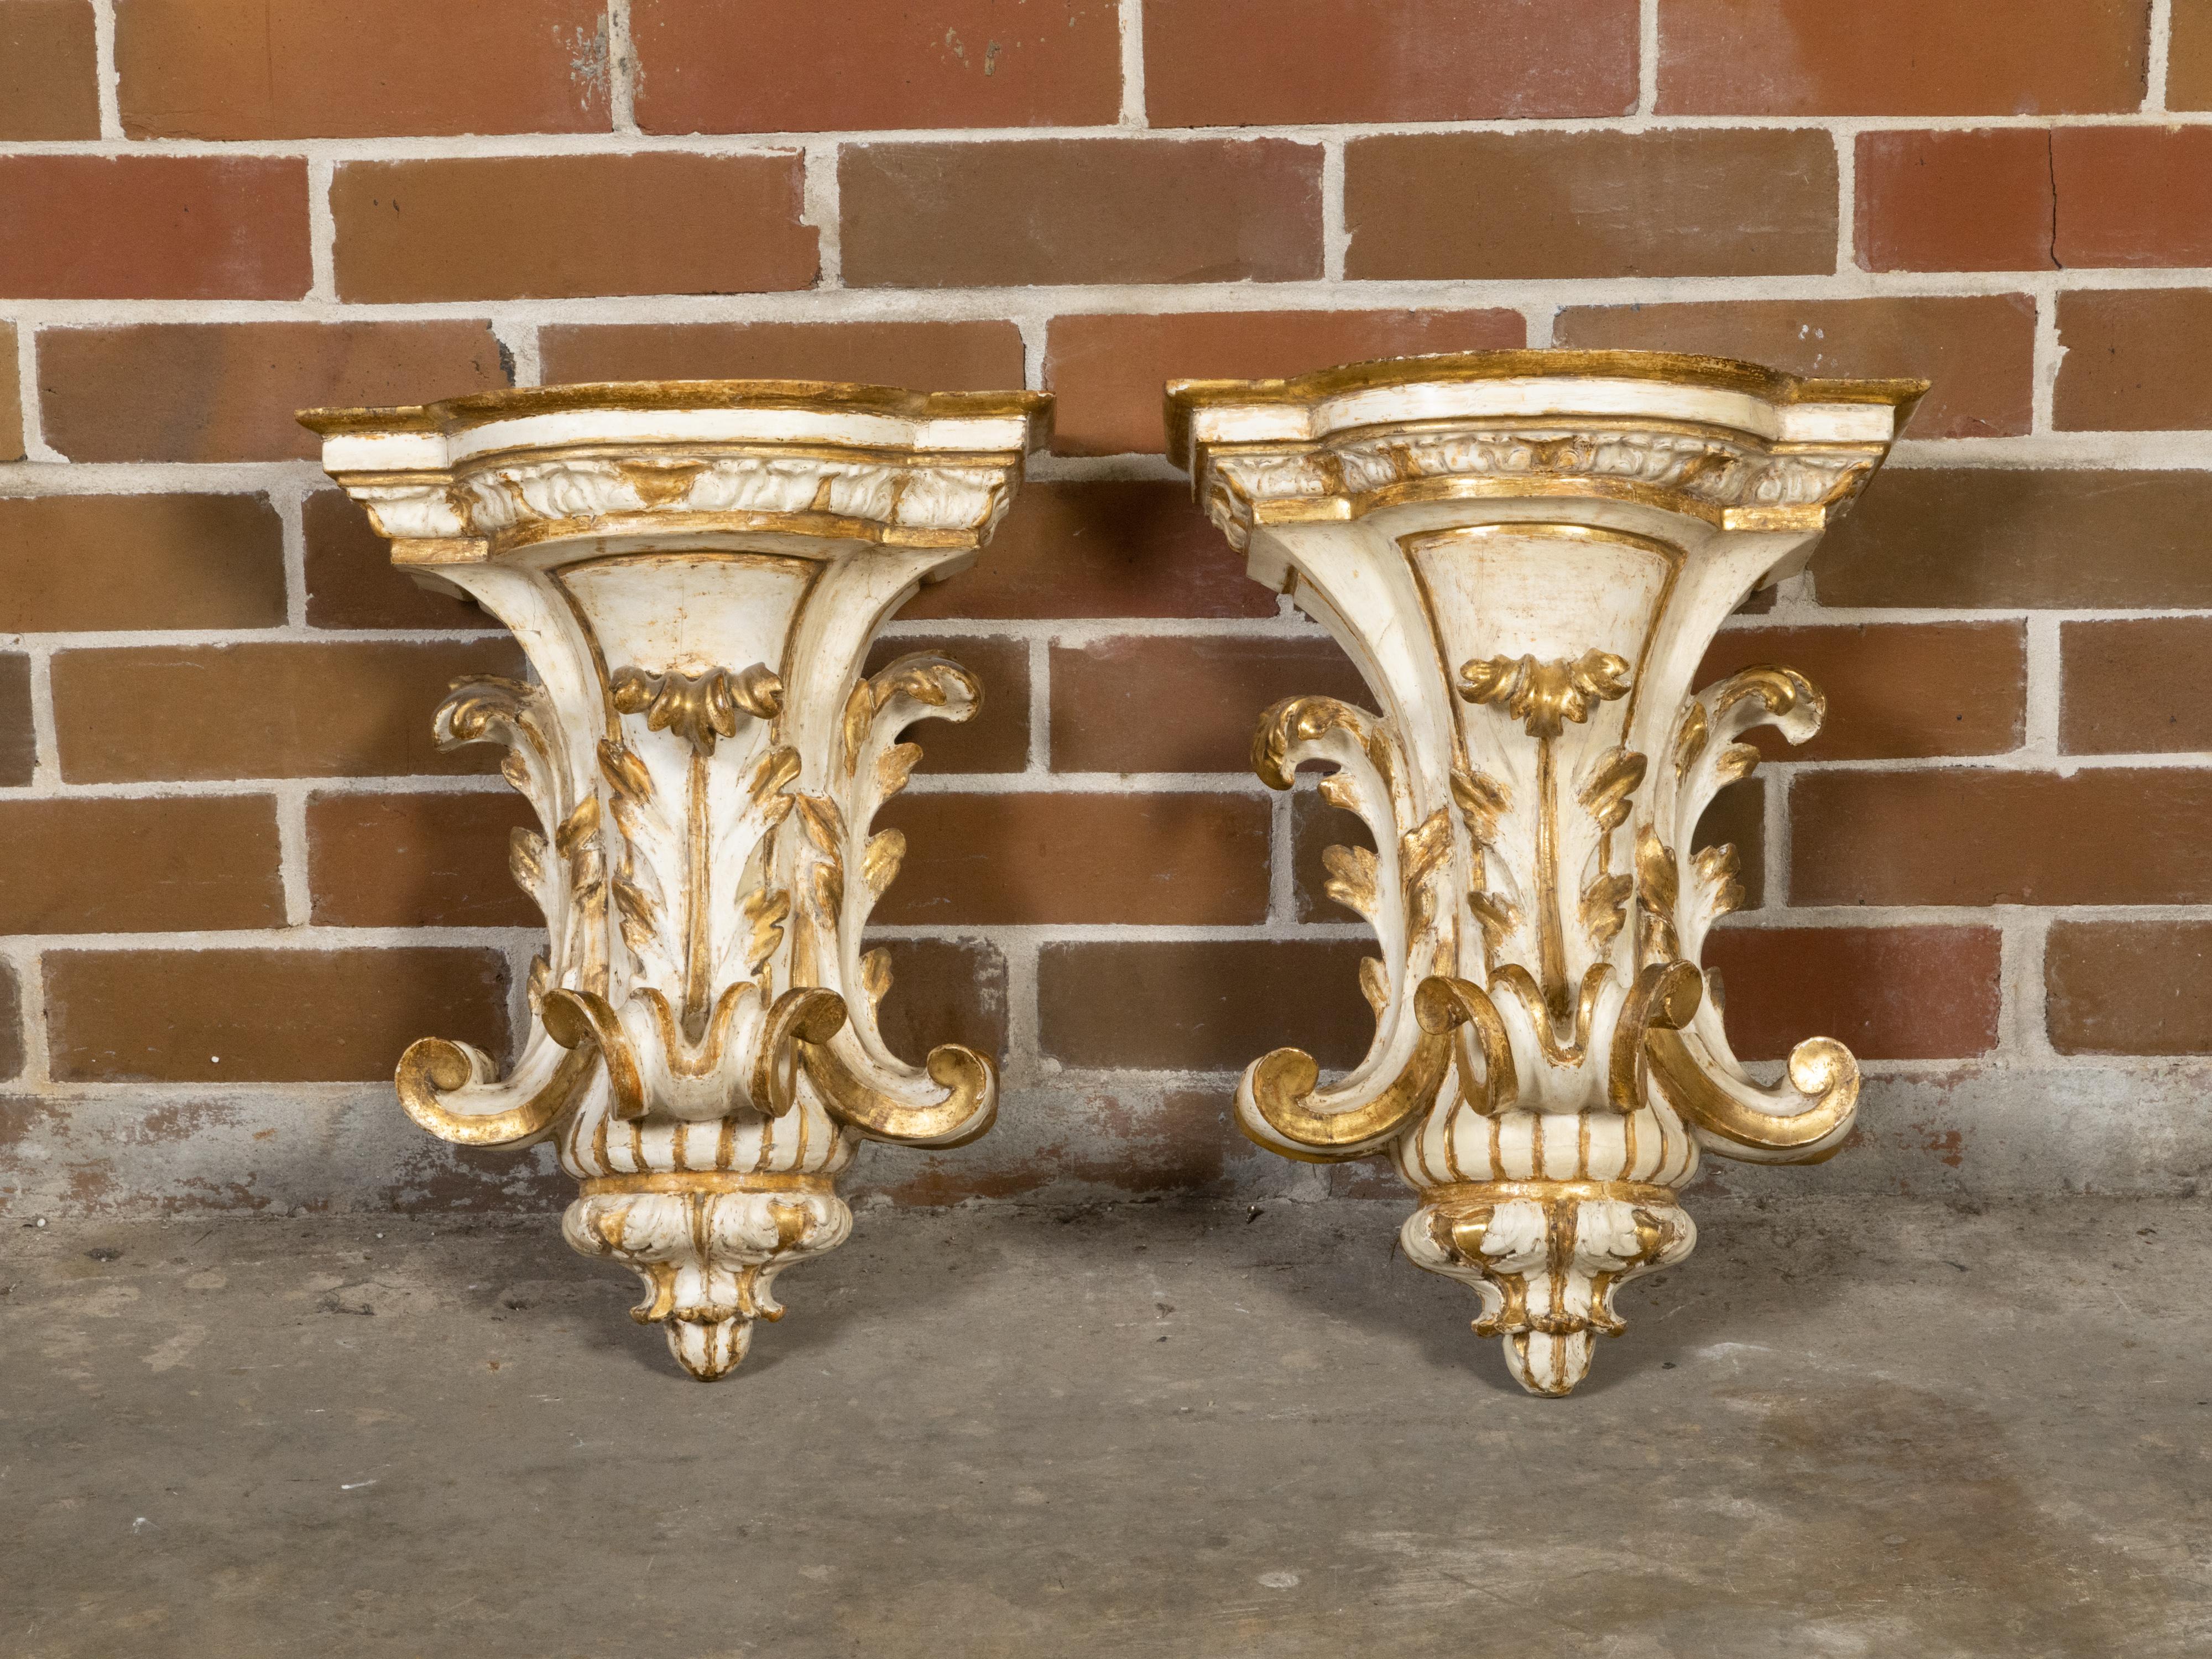 A pair of Italian parcel-gilt and painted wooden brackets from the early 19th century, with carved acanthus leaves and nice patina. Created in Italy during the early years of the 19th century, this pair of wall brackets captures our attention with